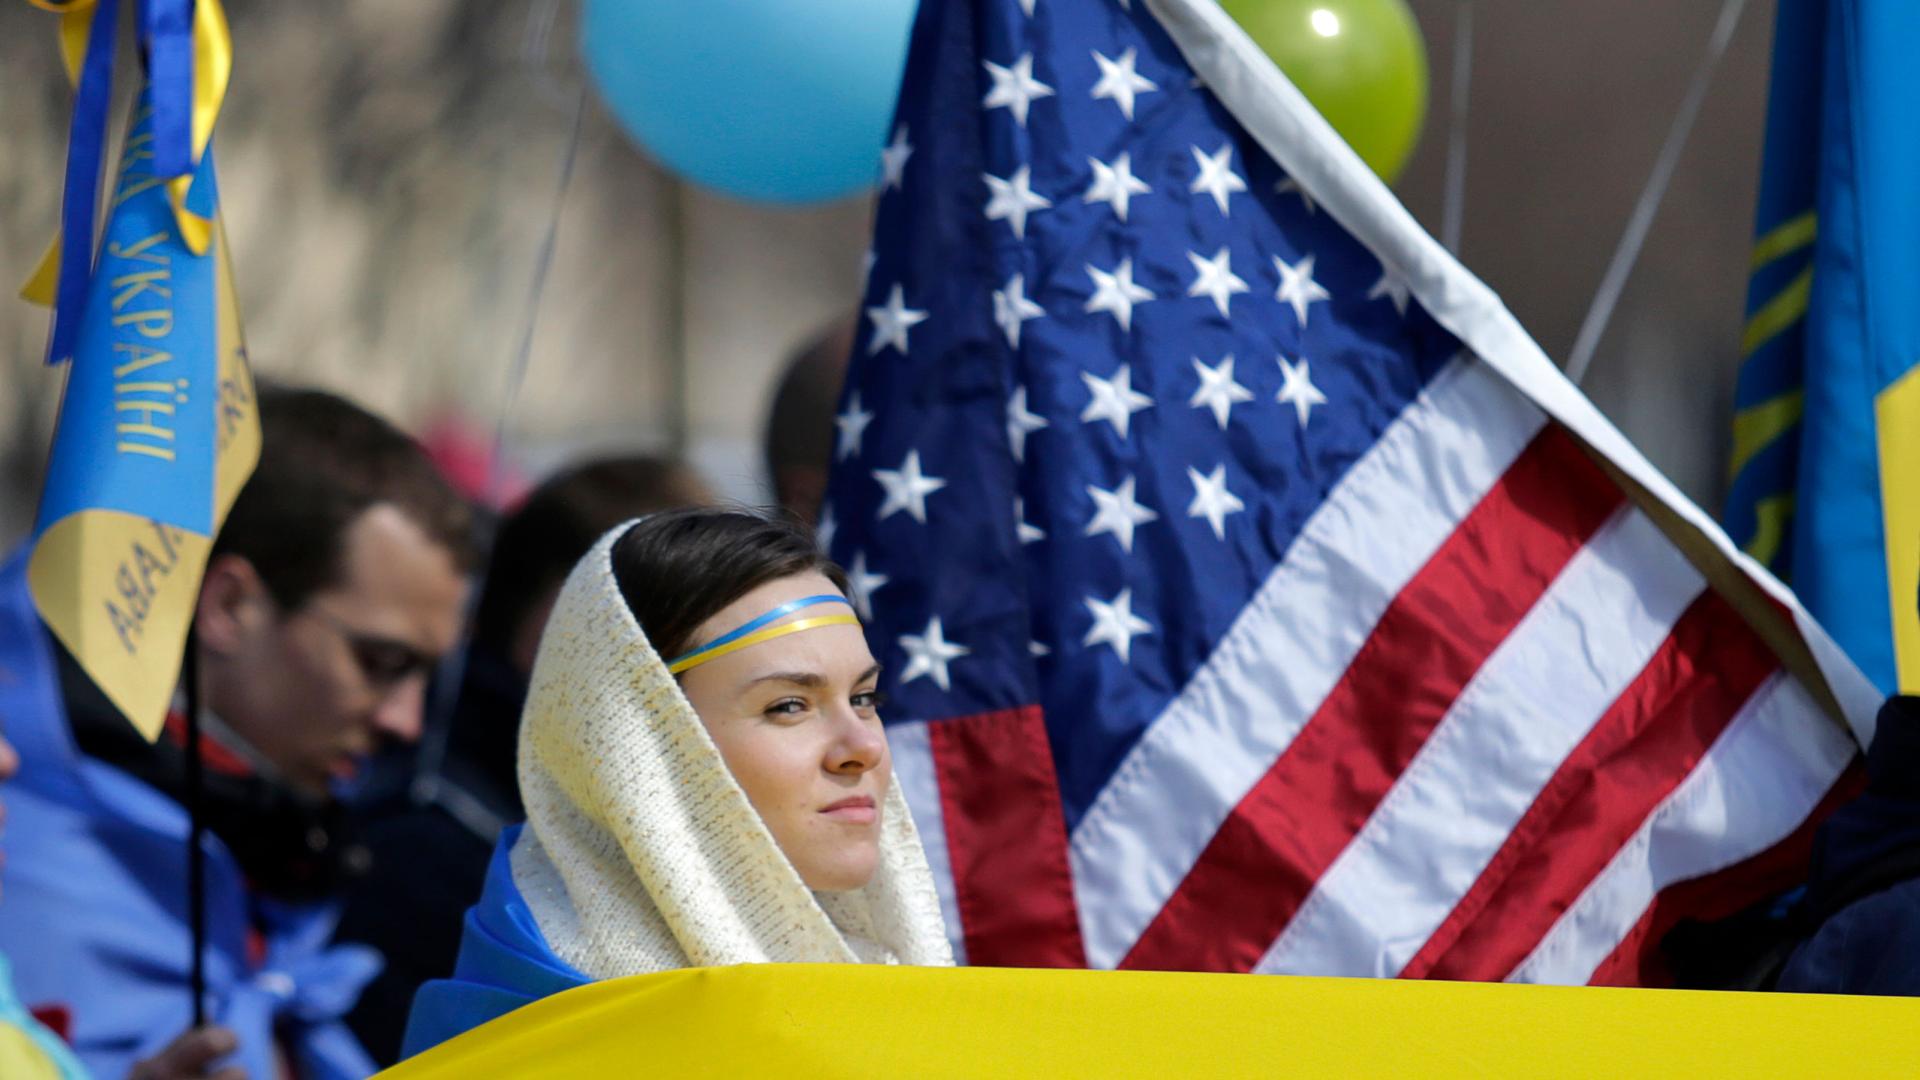 A woman surrounded by US and Ukrainian flags